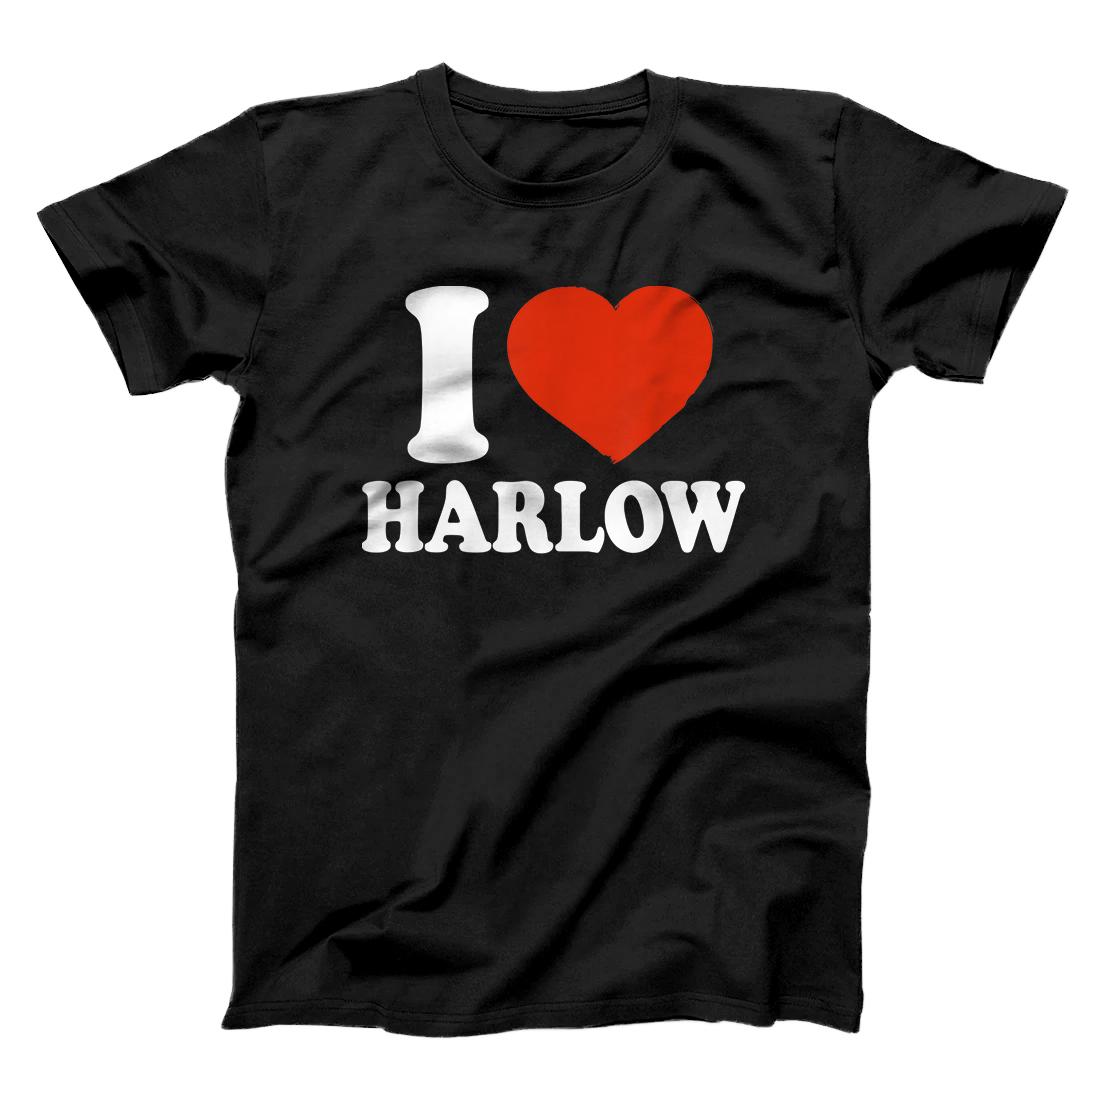 Personalized I Love Harlow, I Heart Harlow, Red Heart Valentine T-Shirt